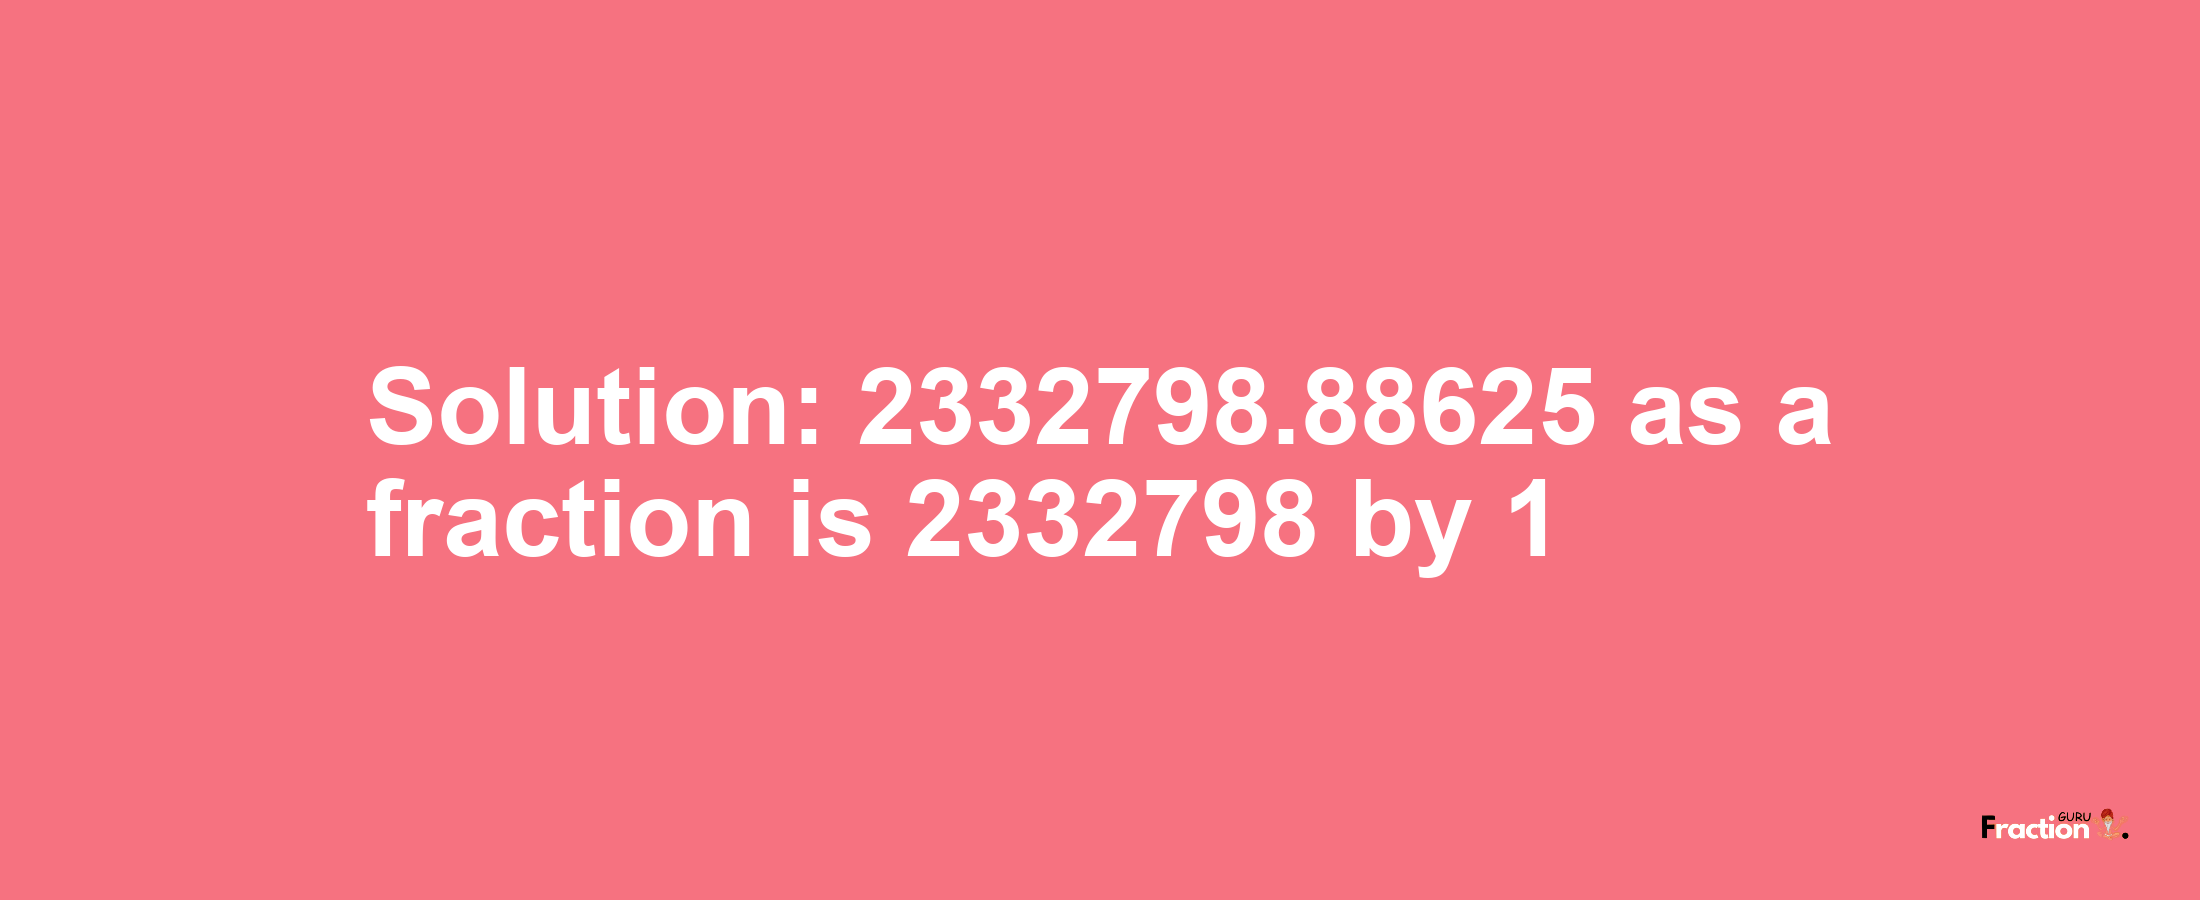 Solution:2332798.88625 as a fraction is 2332798/1